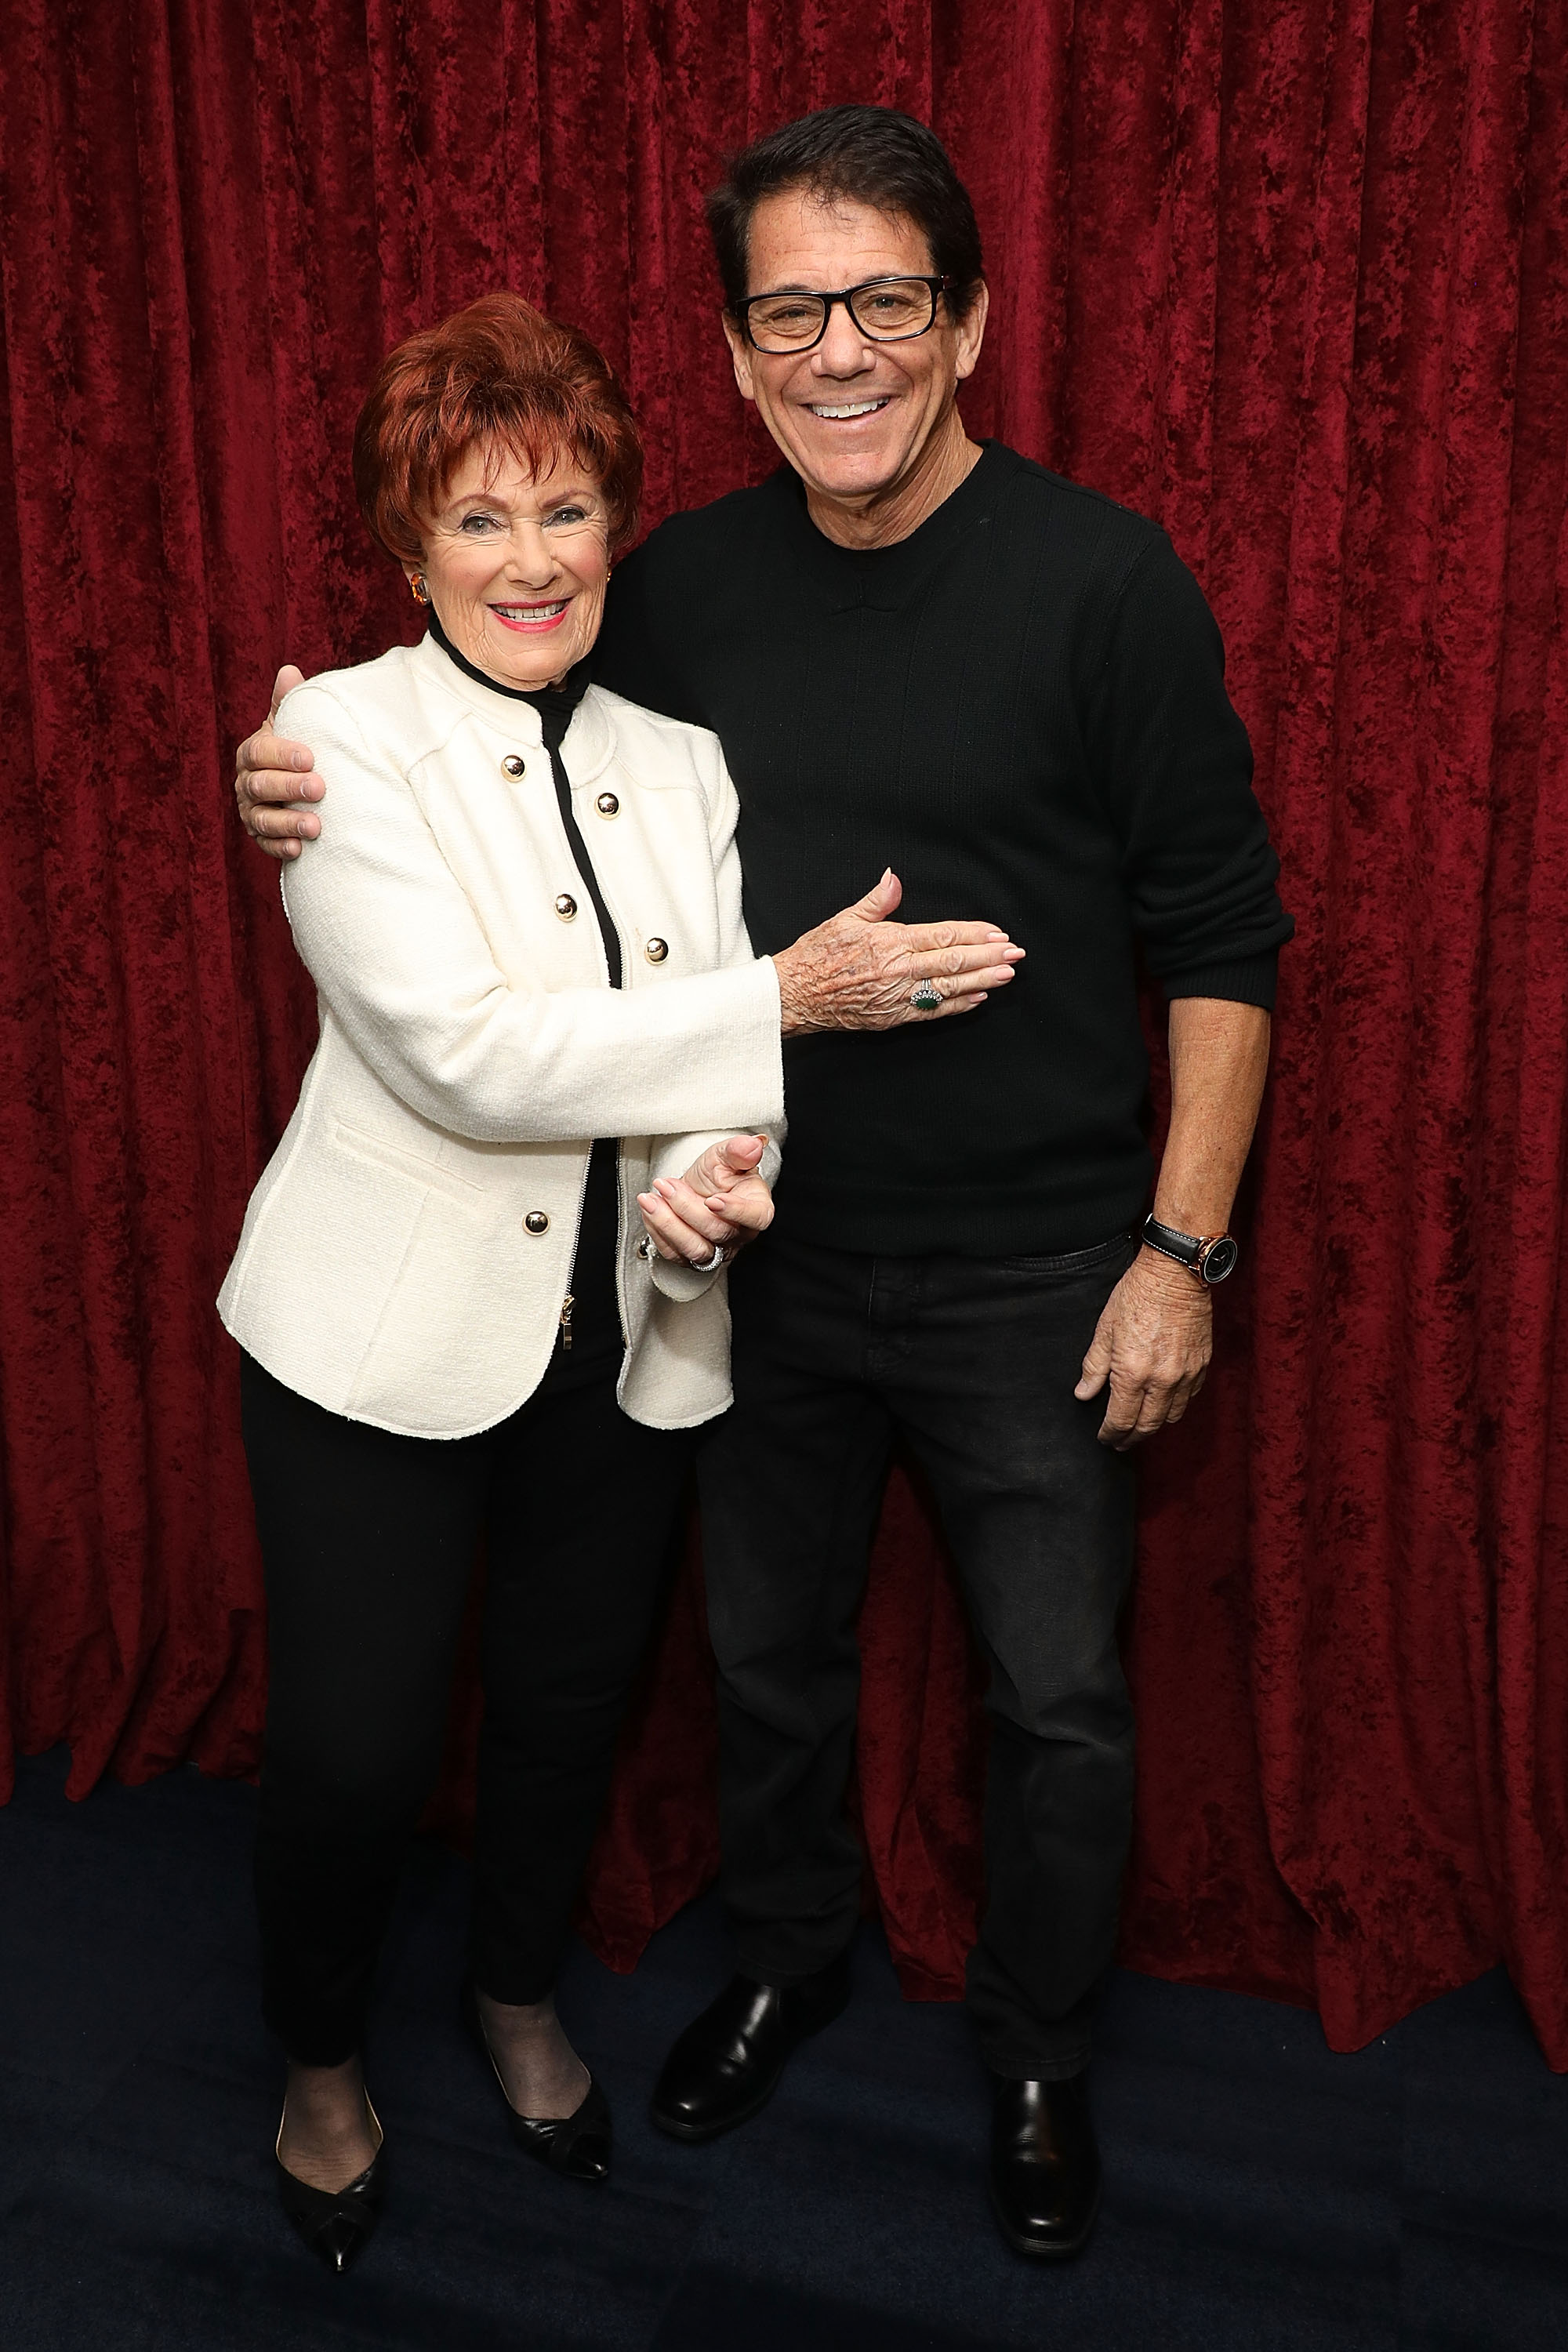 Marion Ross and Anson Williams at the Celebrities Visit SiriusXM in 2018 | Source: Getty Images